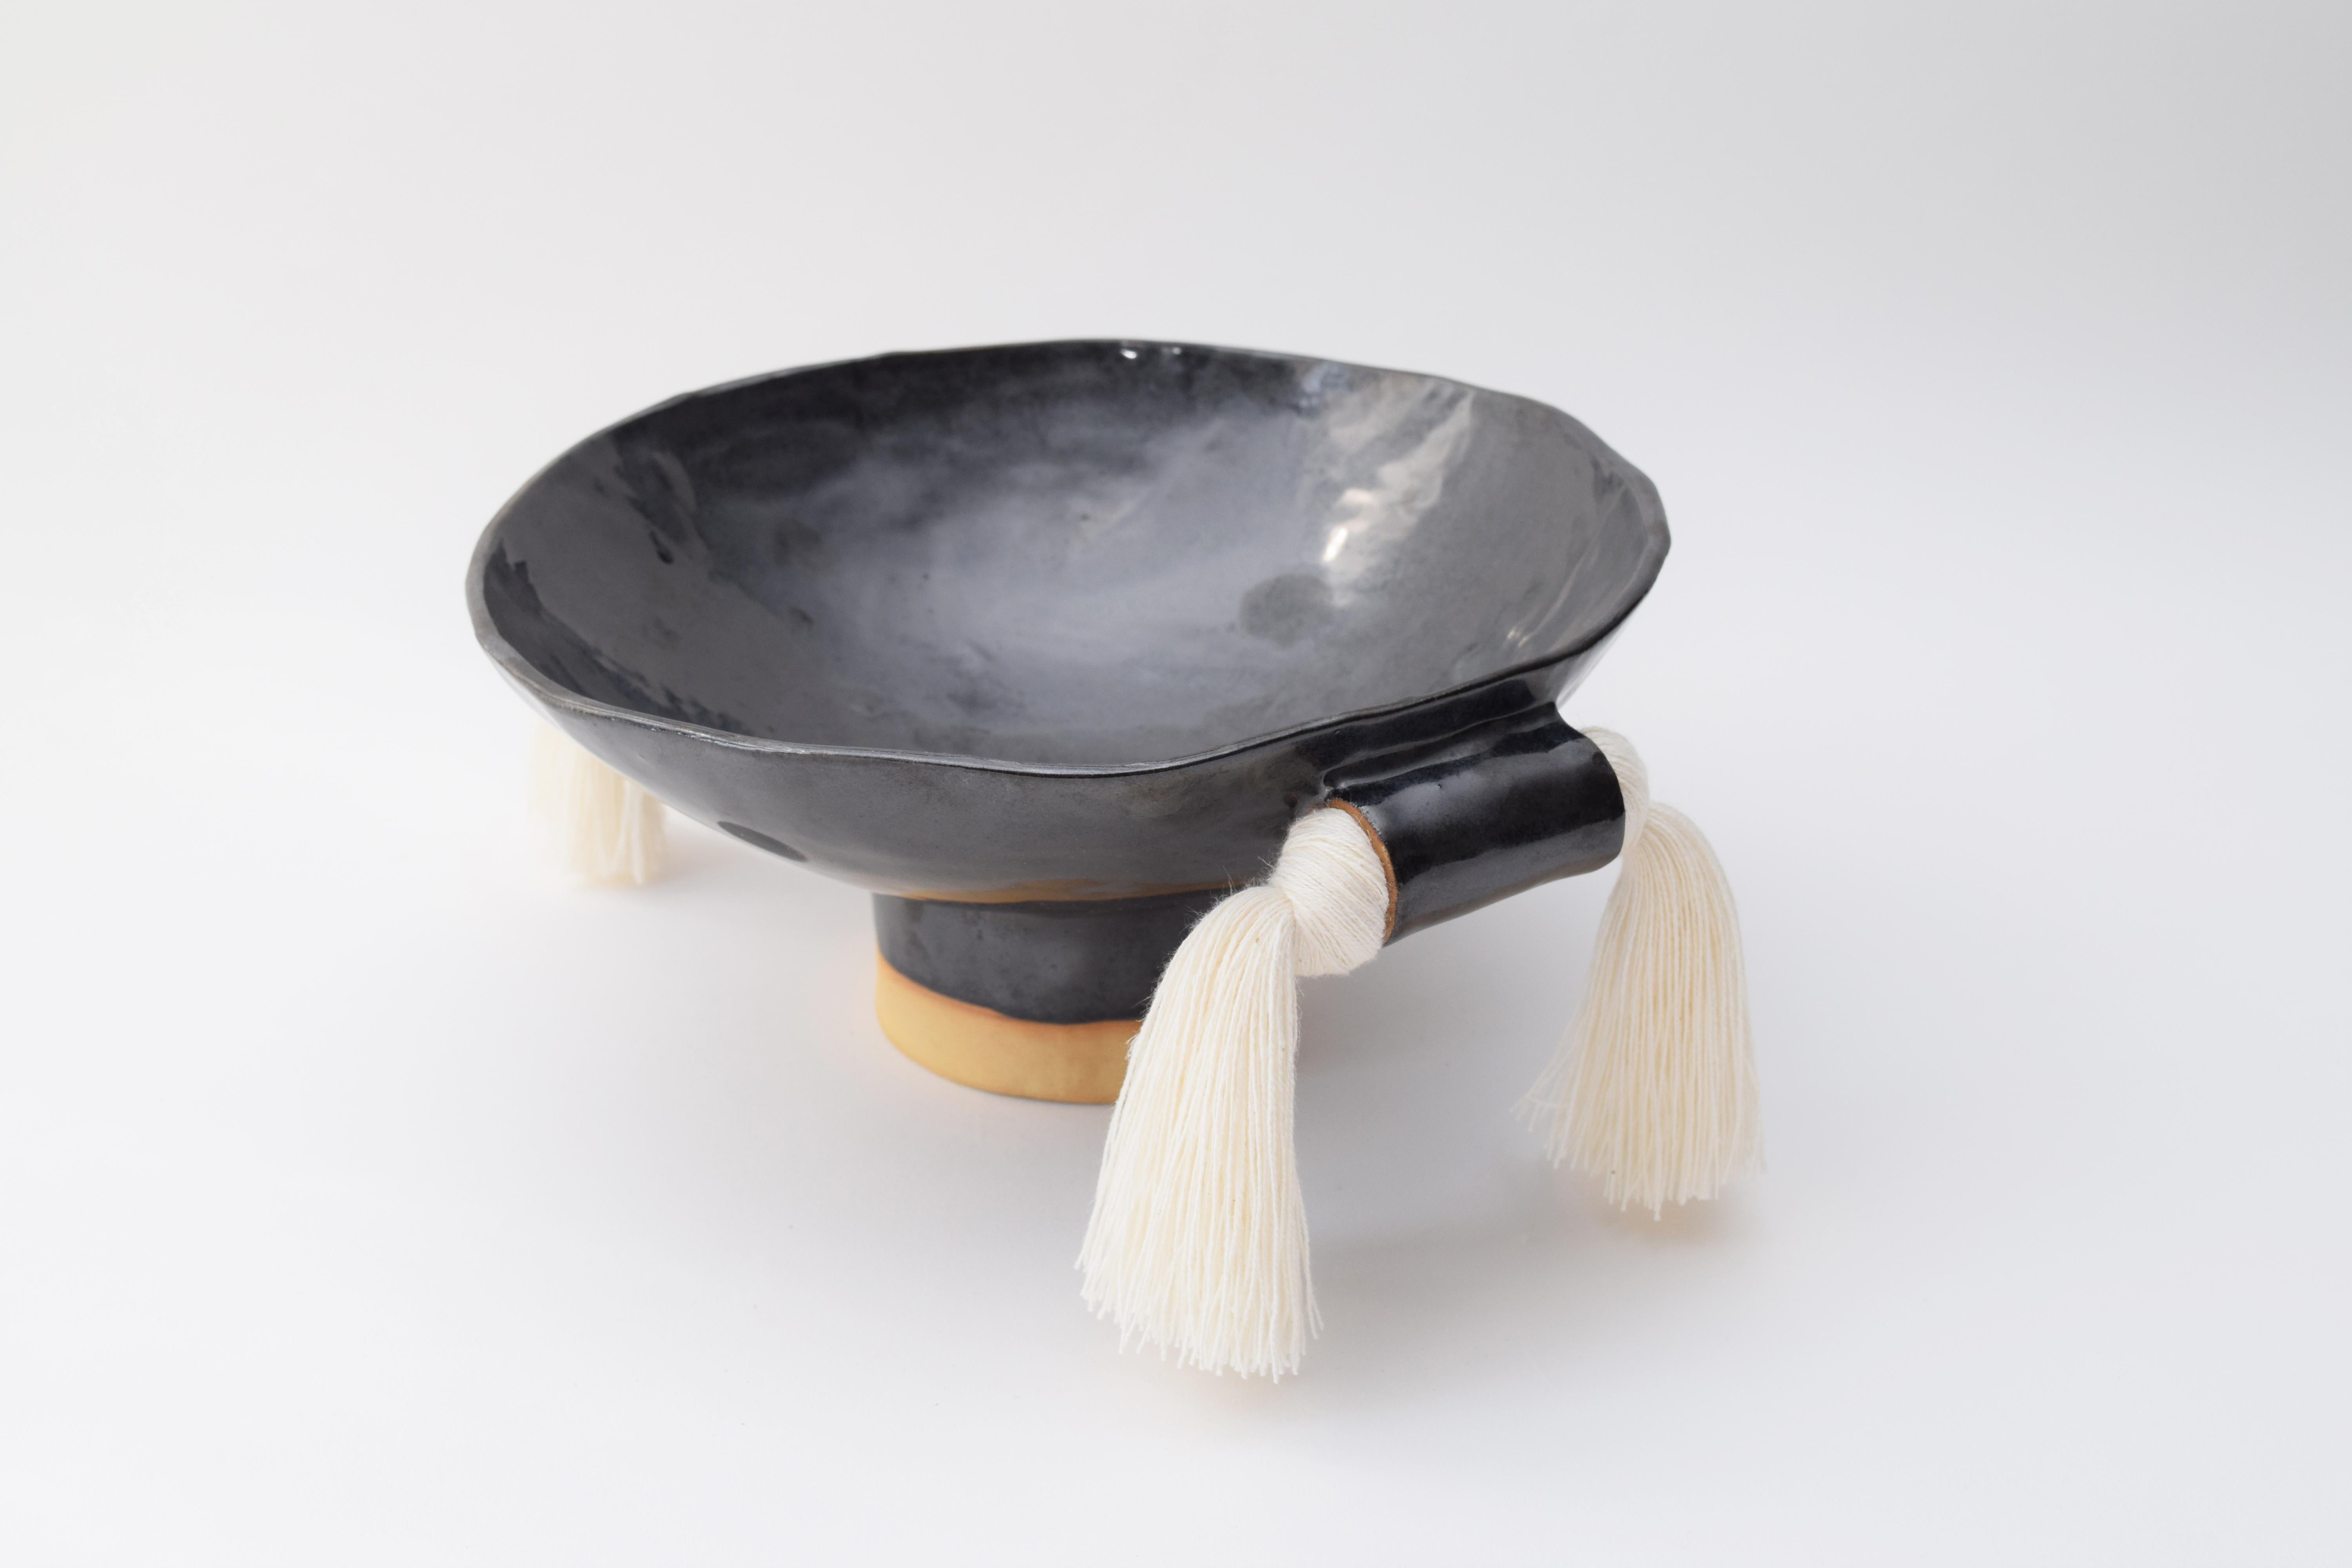 Decorative bowl #697 by Karen Gayle Tinney

A decorative bowl designed to compliment vase #531, with similar sculptural details and ample surface area to make it function nicely as a fruit bowl or catch-all dish.

Handmade stoneware with black